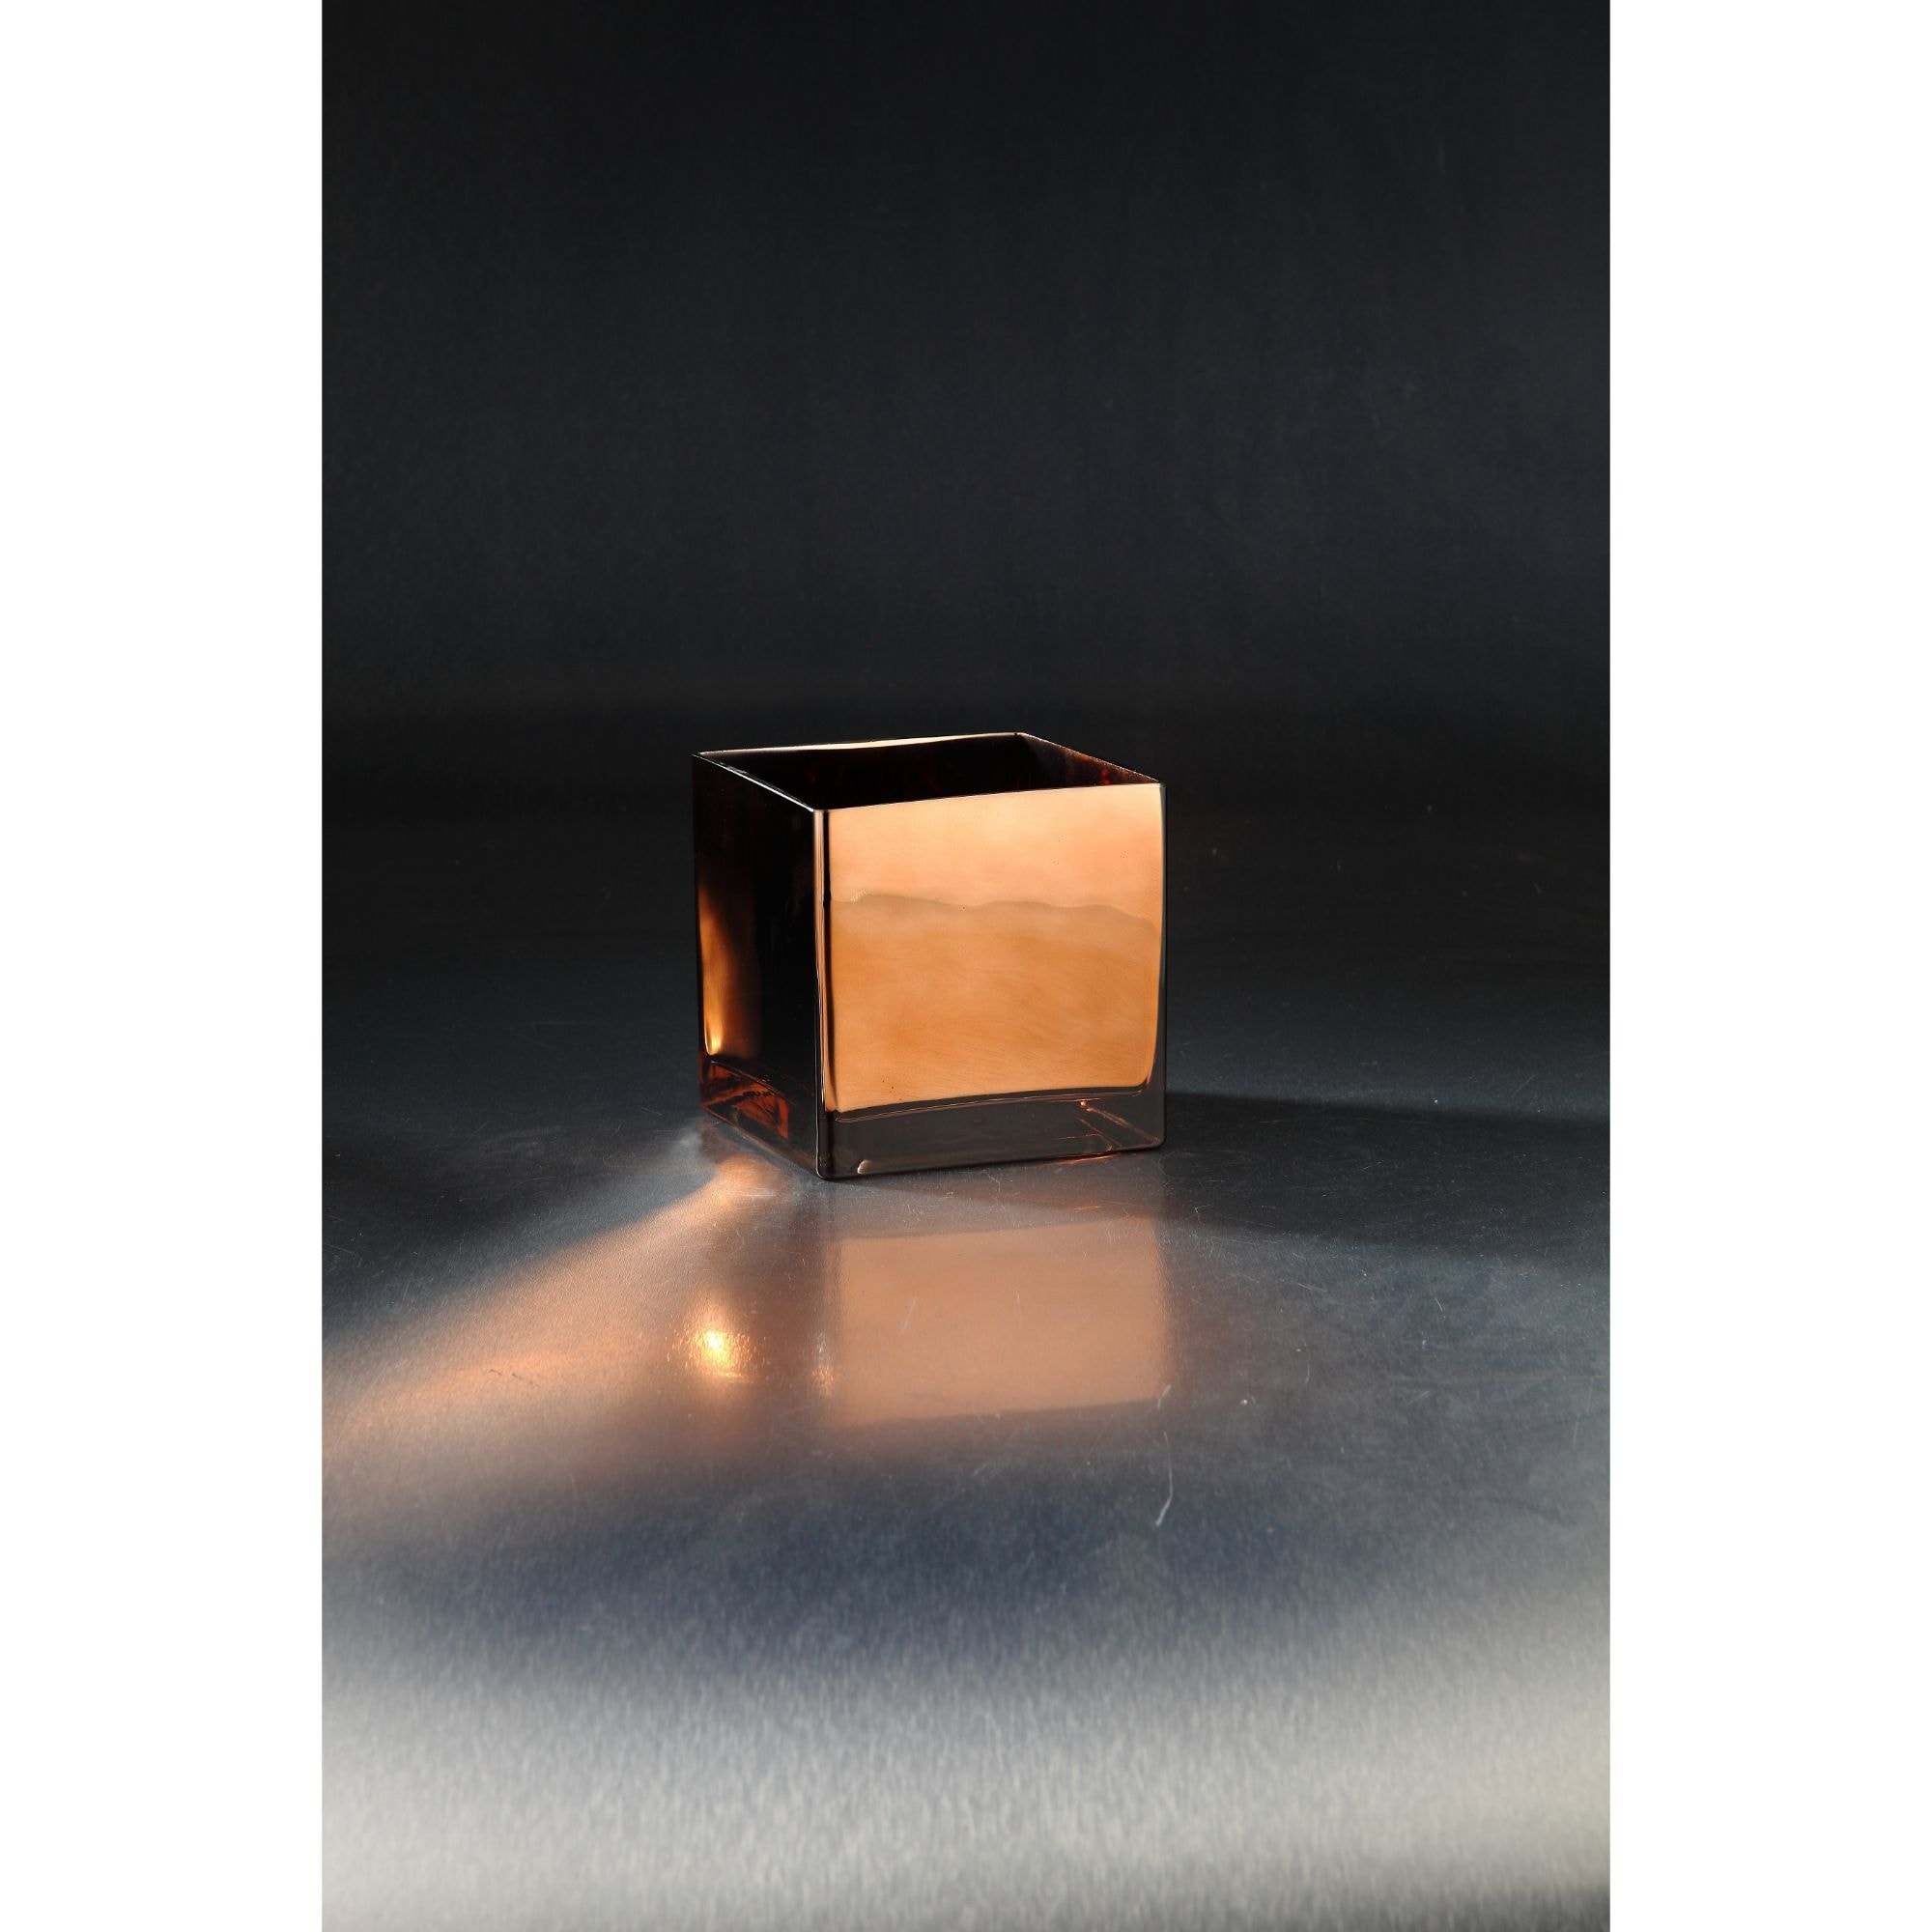 6” Glossy Chocolate Brown Square Tabletop Glass Vase